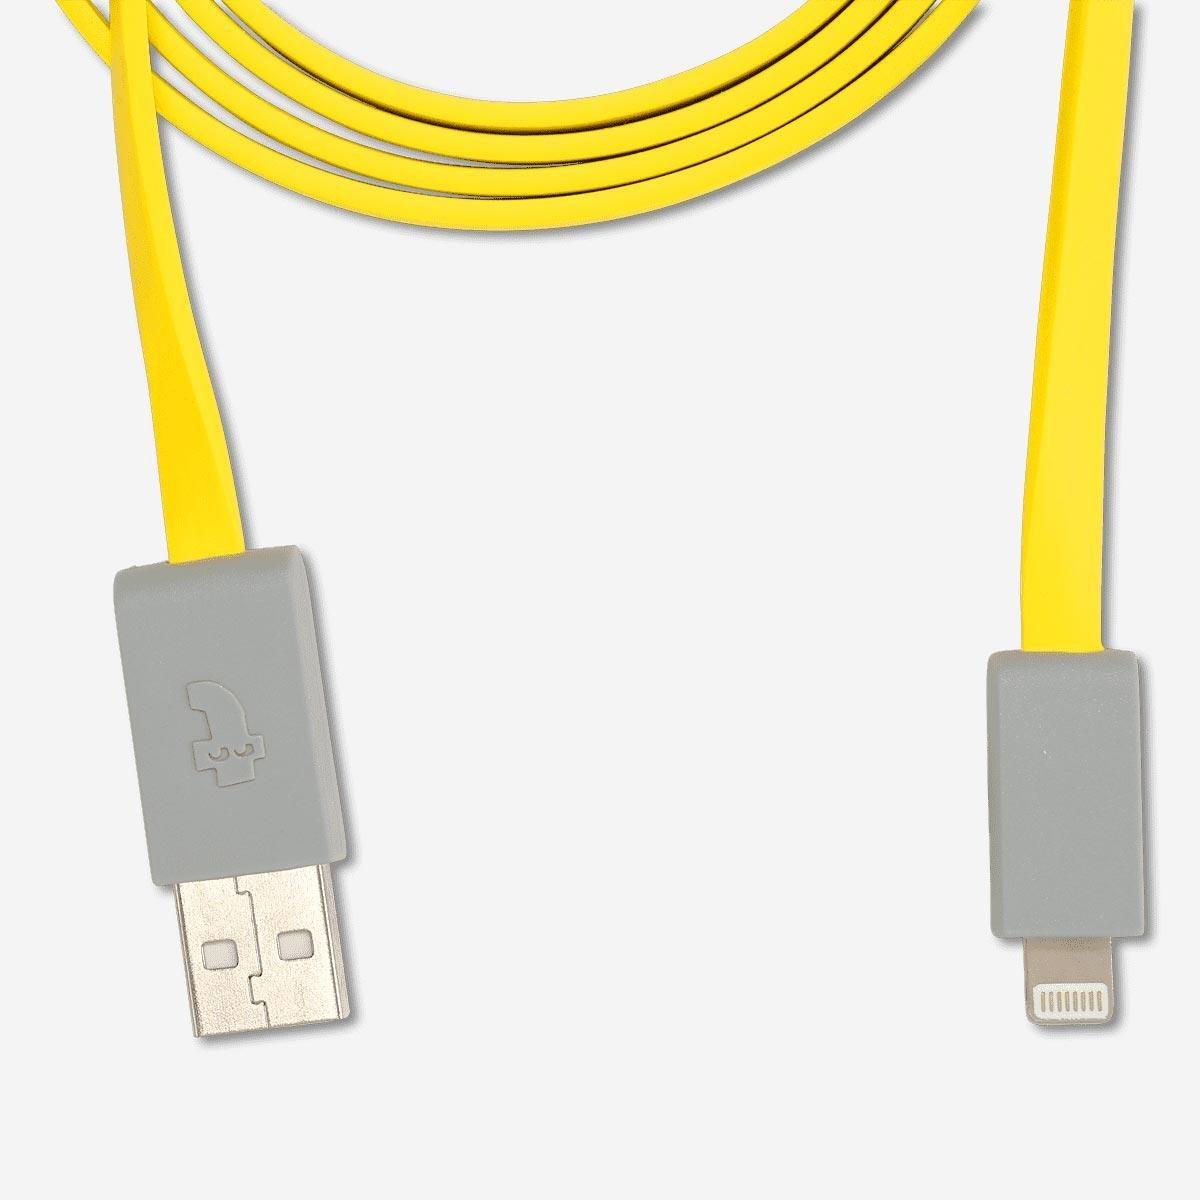 Yellow iphones charging cable.